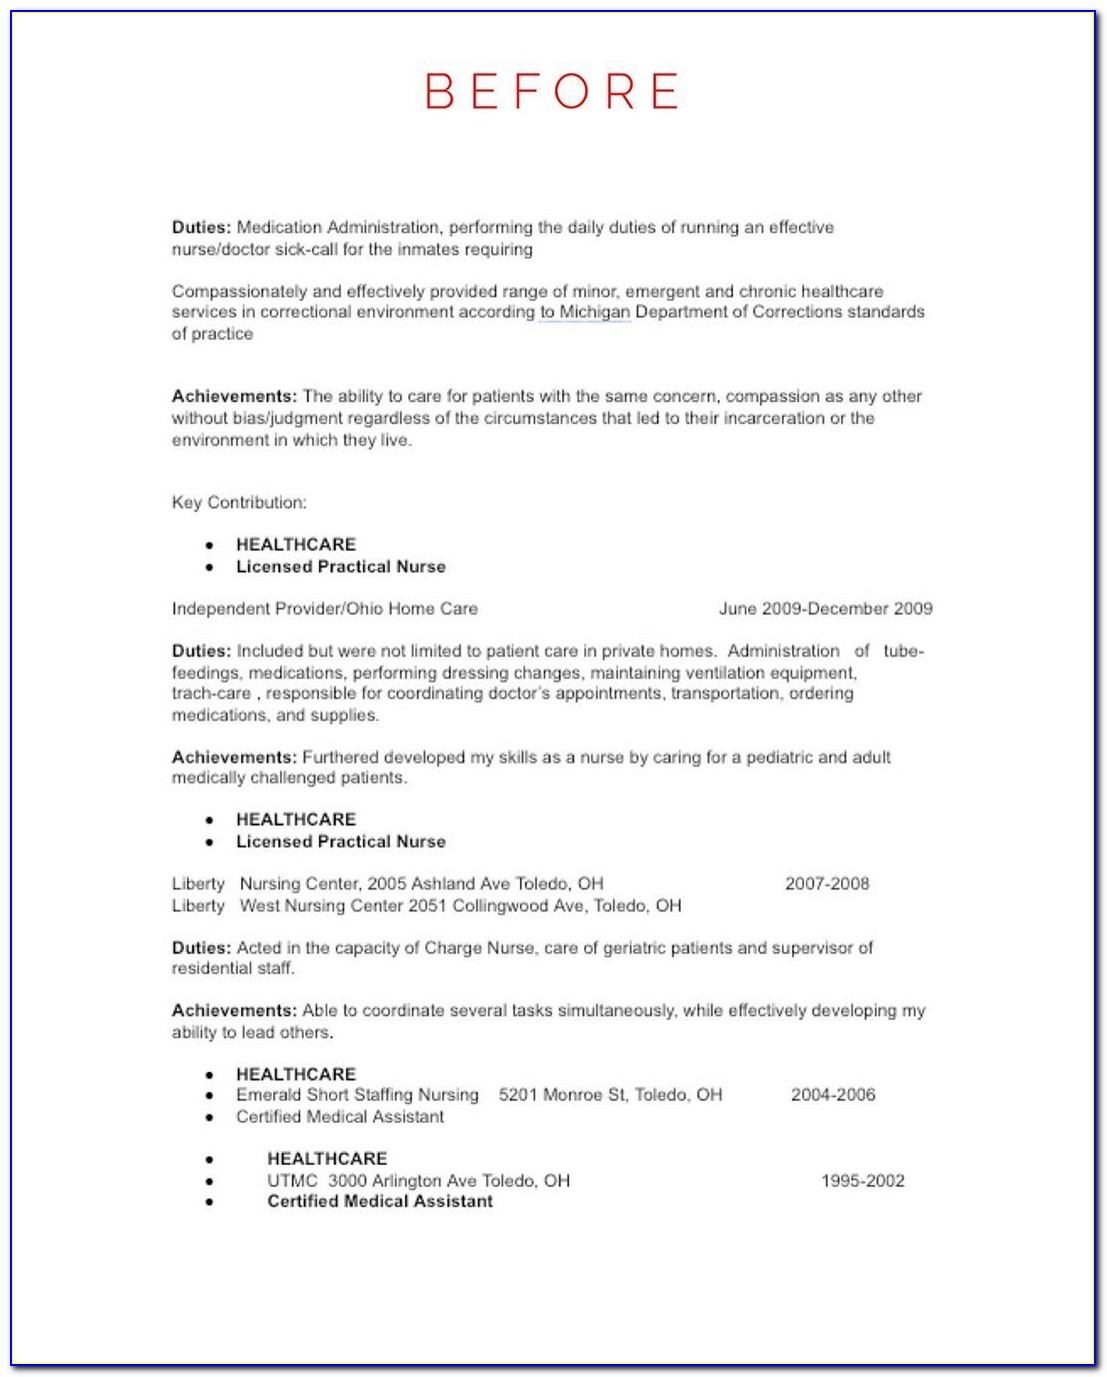 Local Professional Resume Writers